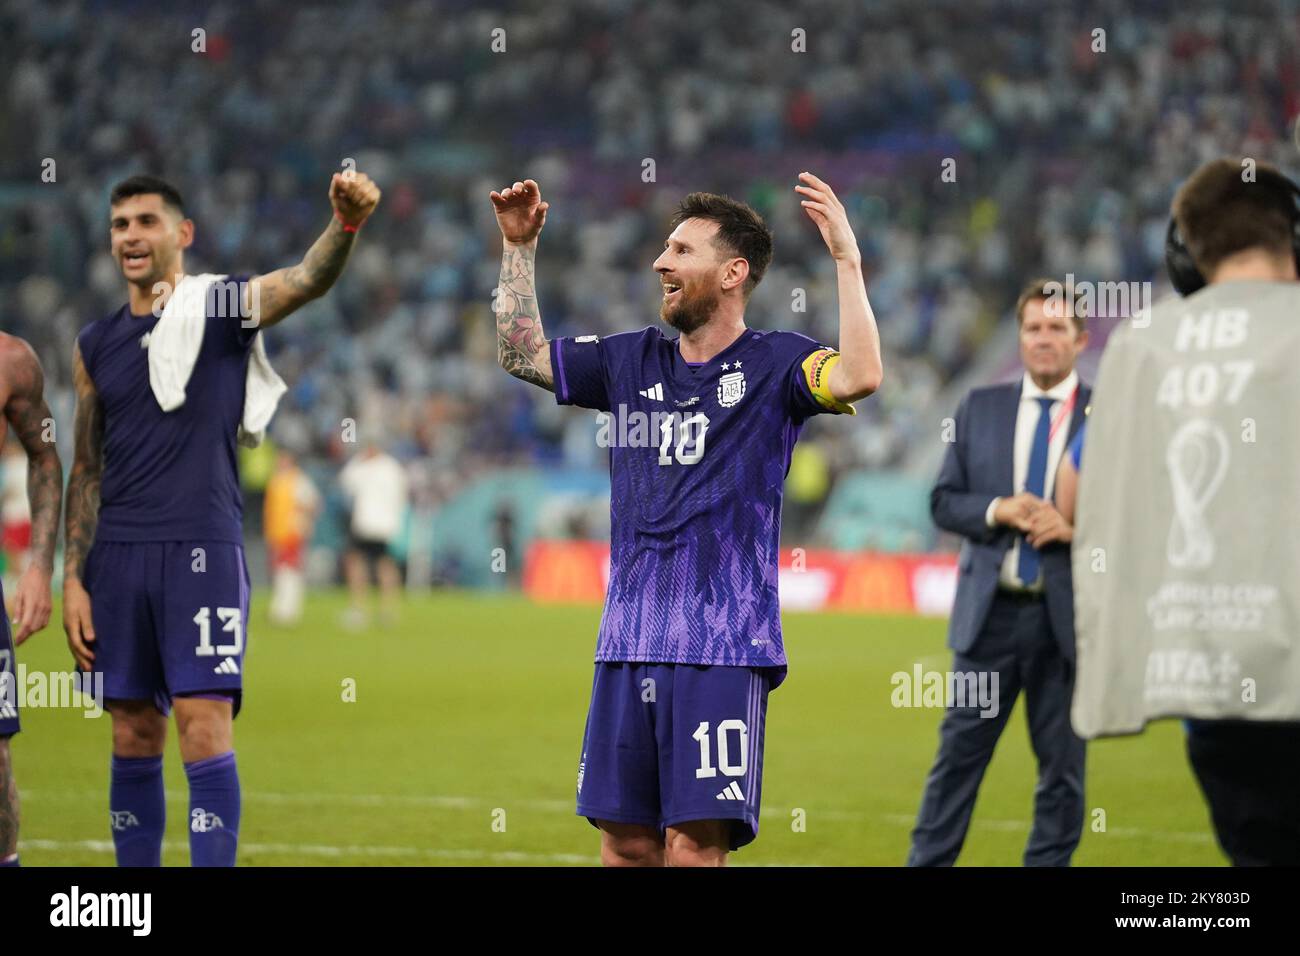 DOHA, QATAR - NOVEMBER 30: Players of Argentina celebrate the victory during the FIFA World Cup Qatar 2022 group C match between Argentina and Poland at Stadium 974 on November 30, 2022 in Doha, Qatar. (Photo by Florencia Tan Jun/PxImages) Credit: Px Images/Alamy Live News Stock Photo